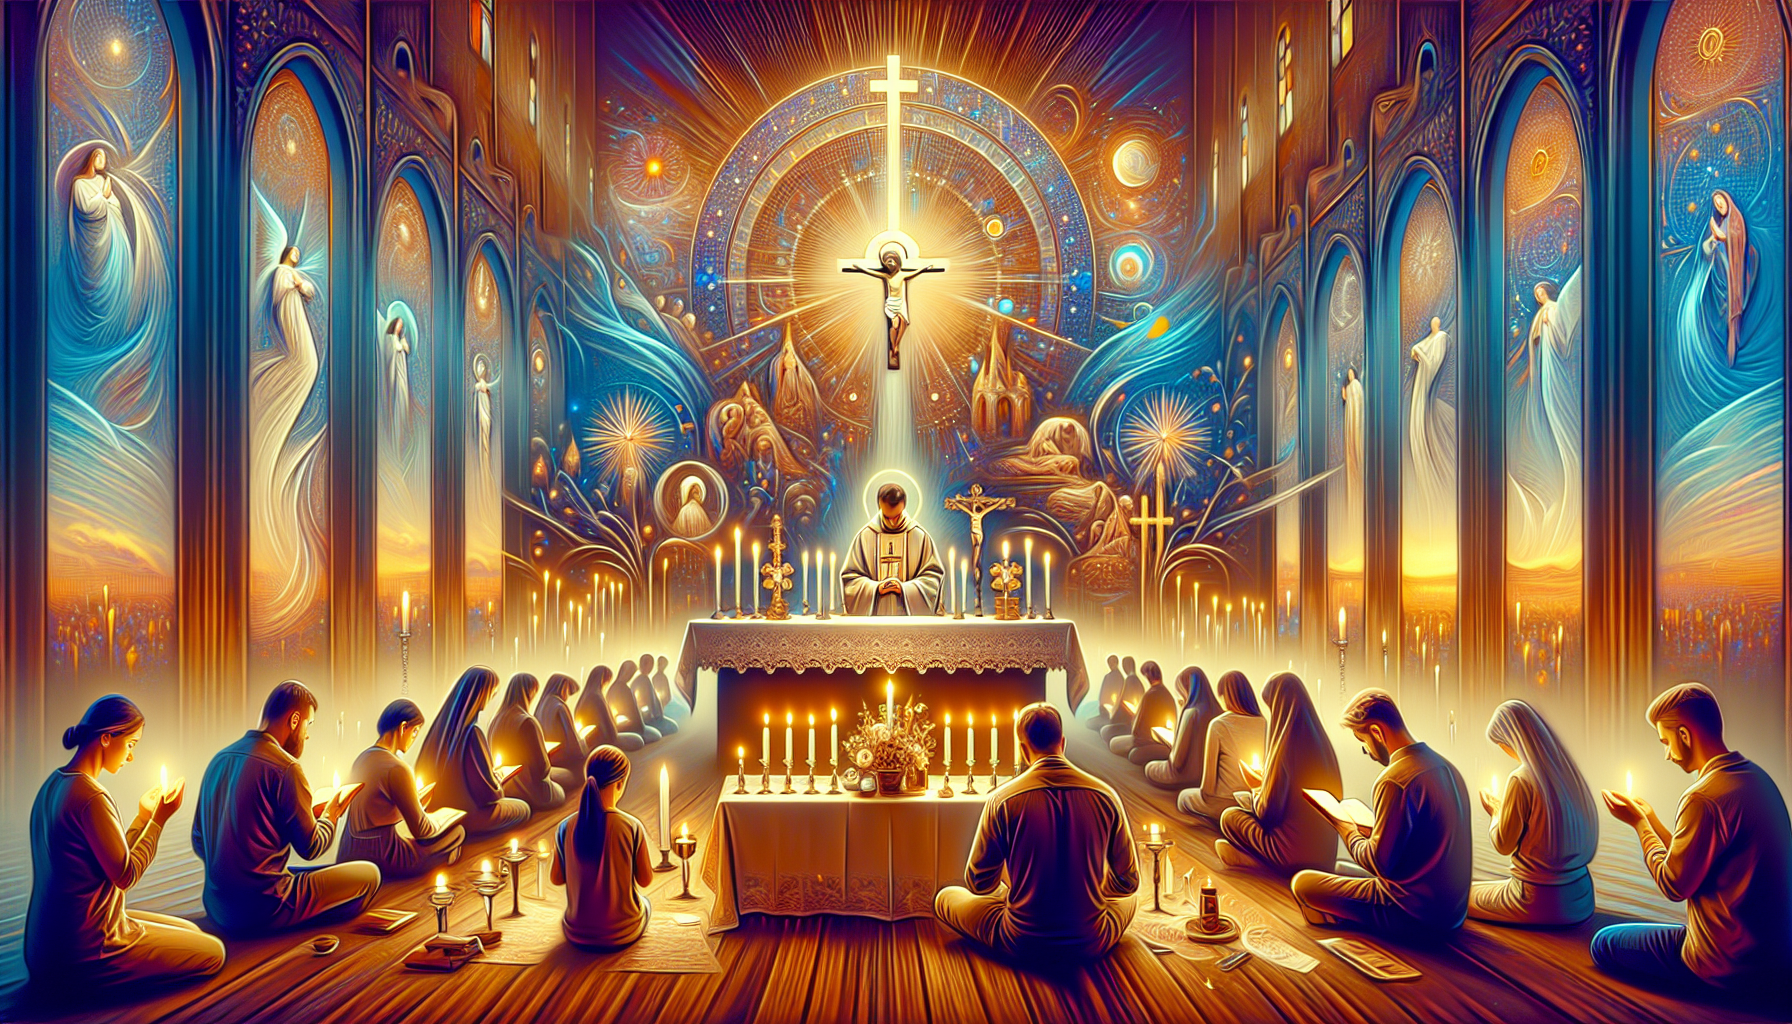 Create an image that depicts a serene and peaceful setting, where an individual or a small group of people is engaged in prayer, symbolizing the 'Novena de 54 Días'. The background could show an altar